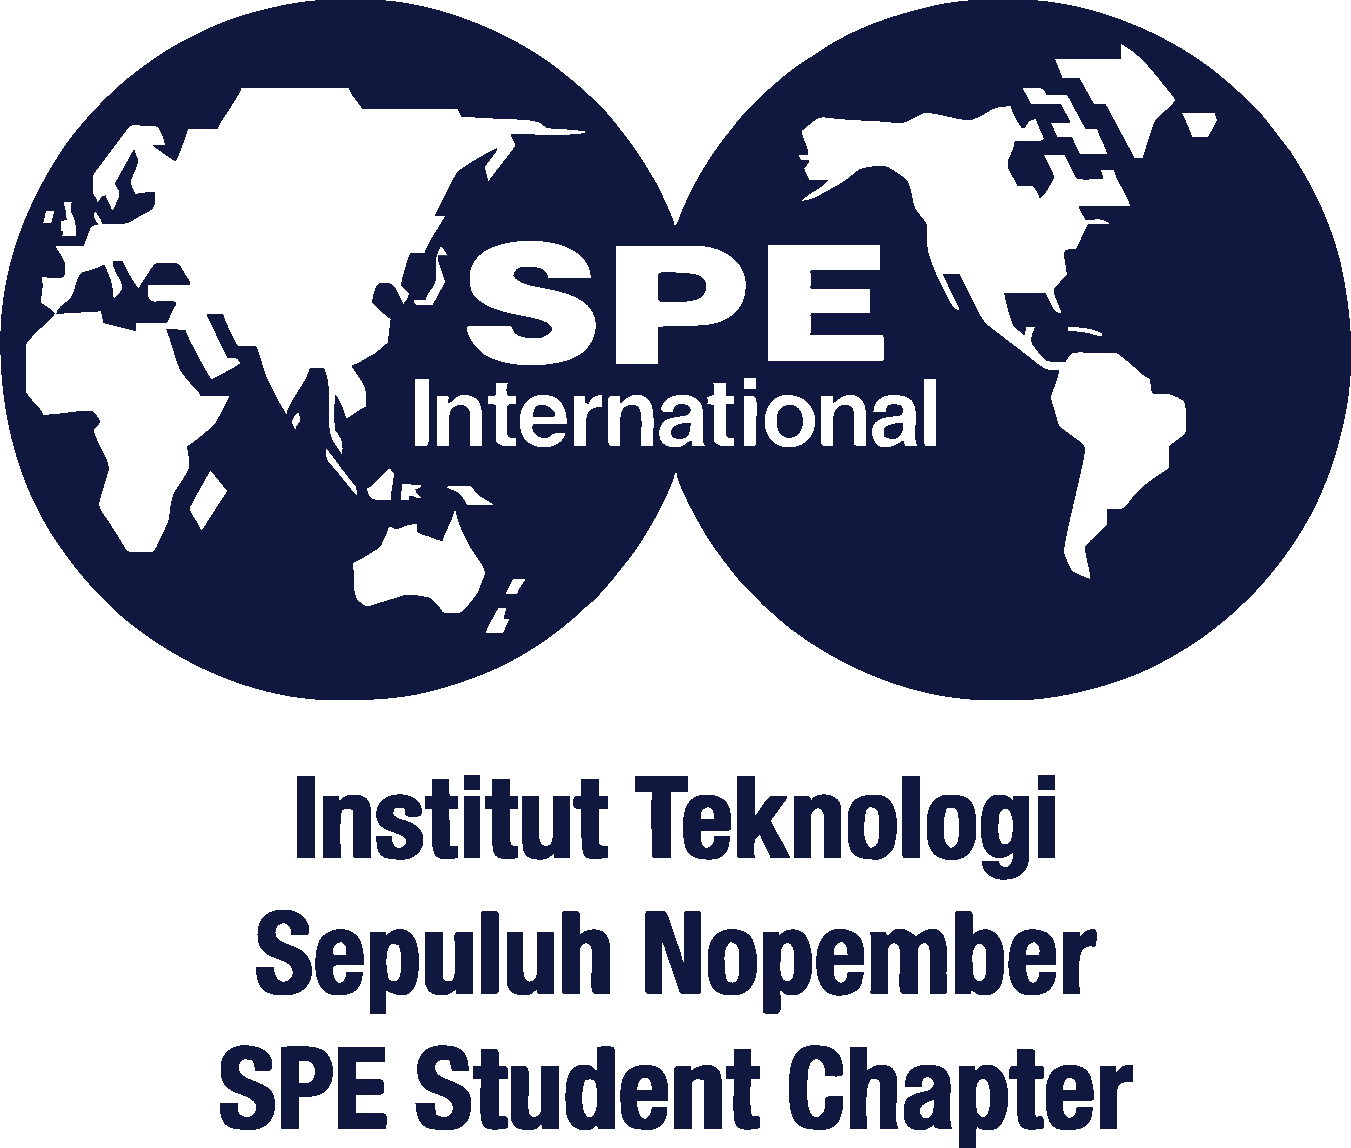 SPE ITS Student Chapter